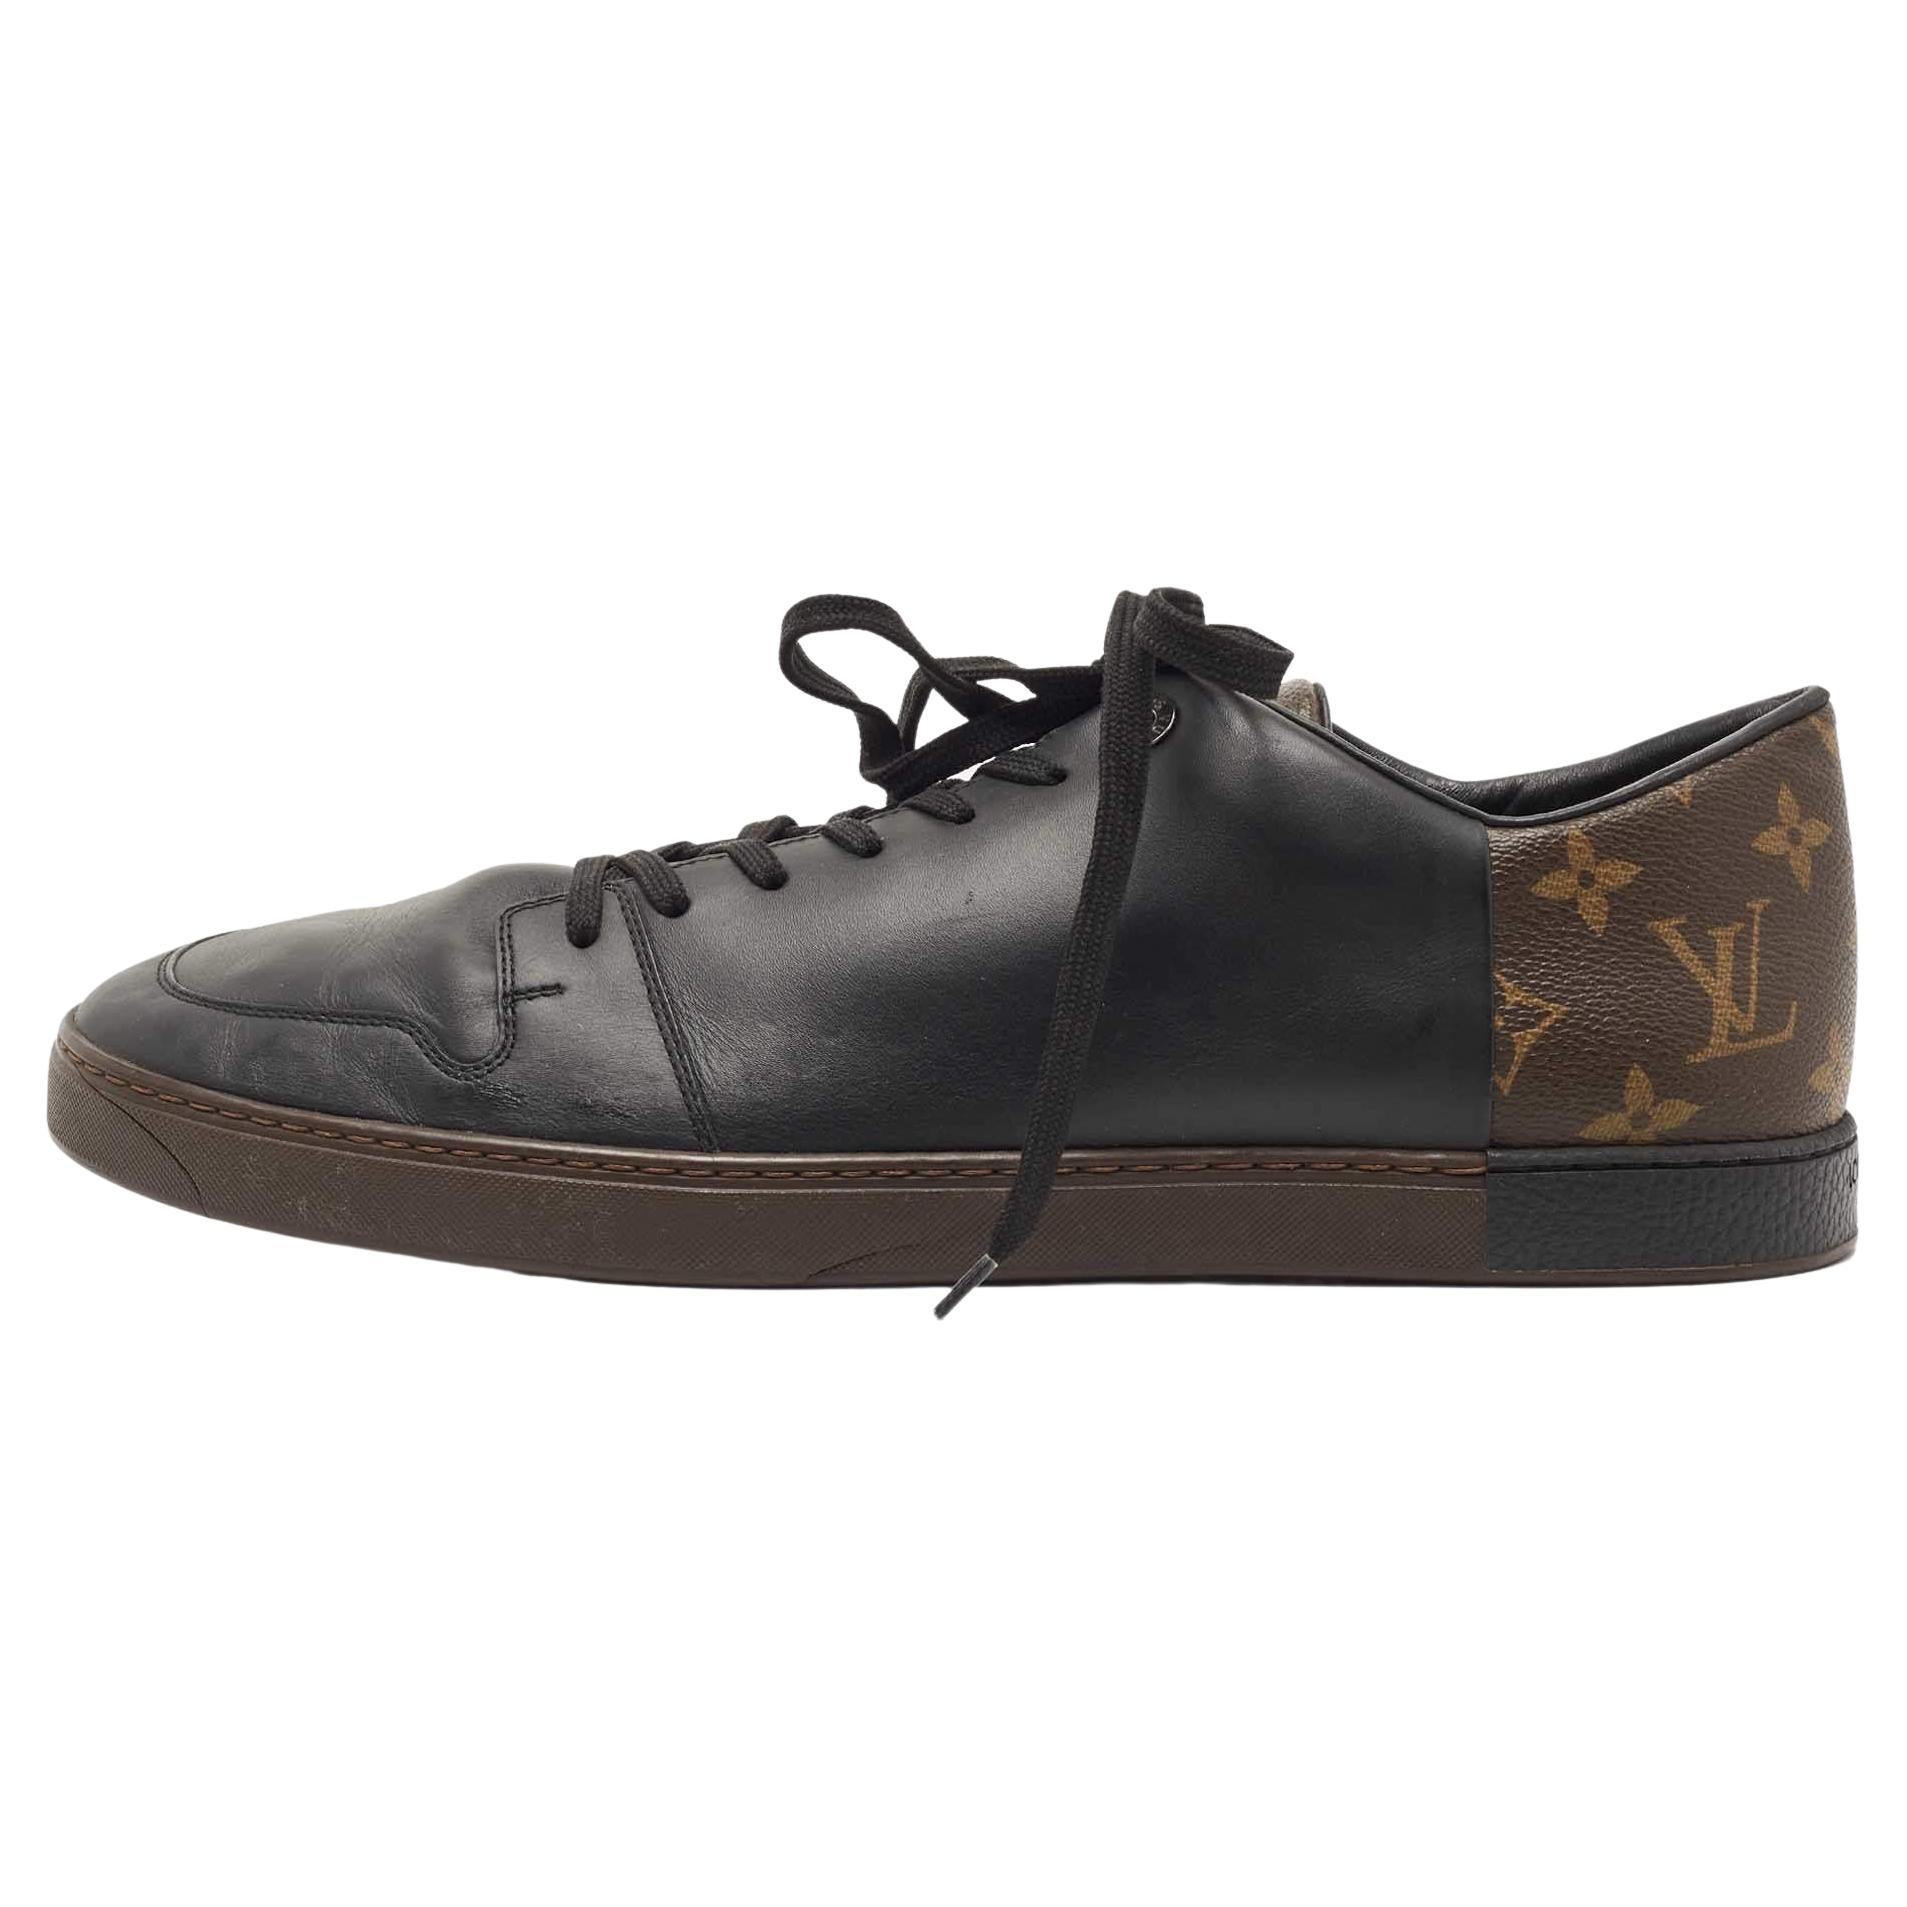 Louis Vuitton Black Leather and Monogram Canvas Line Up Sneakers Size 43